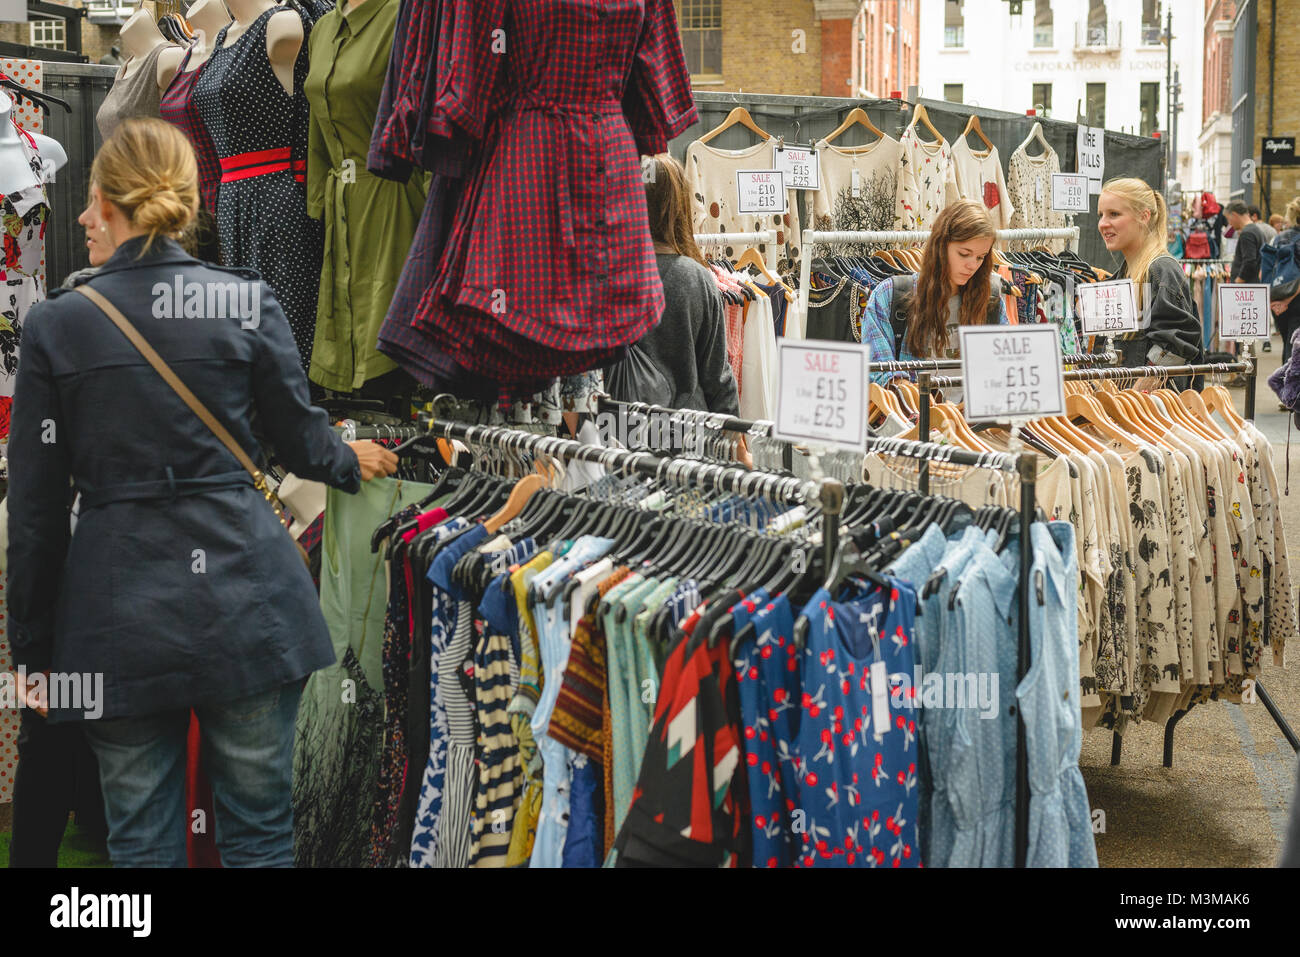 Vintage clothes stall in Spitalfields Market. East London (UK), August 2017. Landscape format. Stock Photo